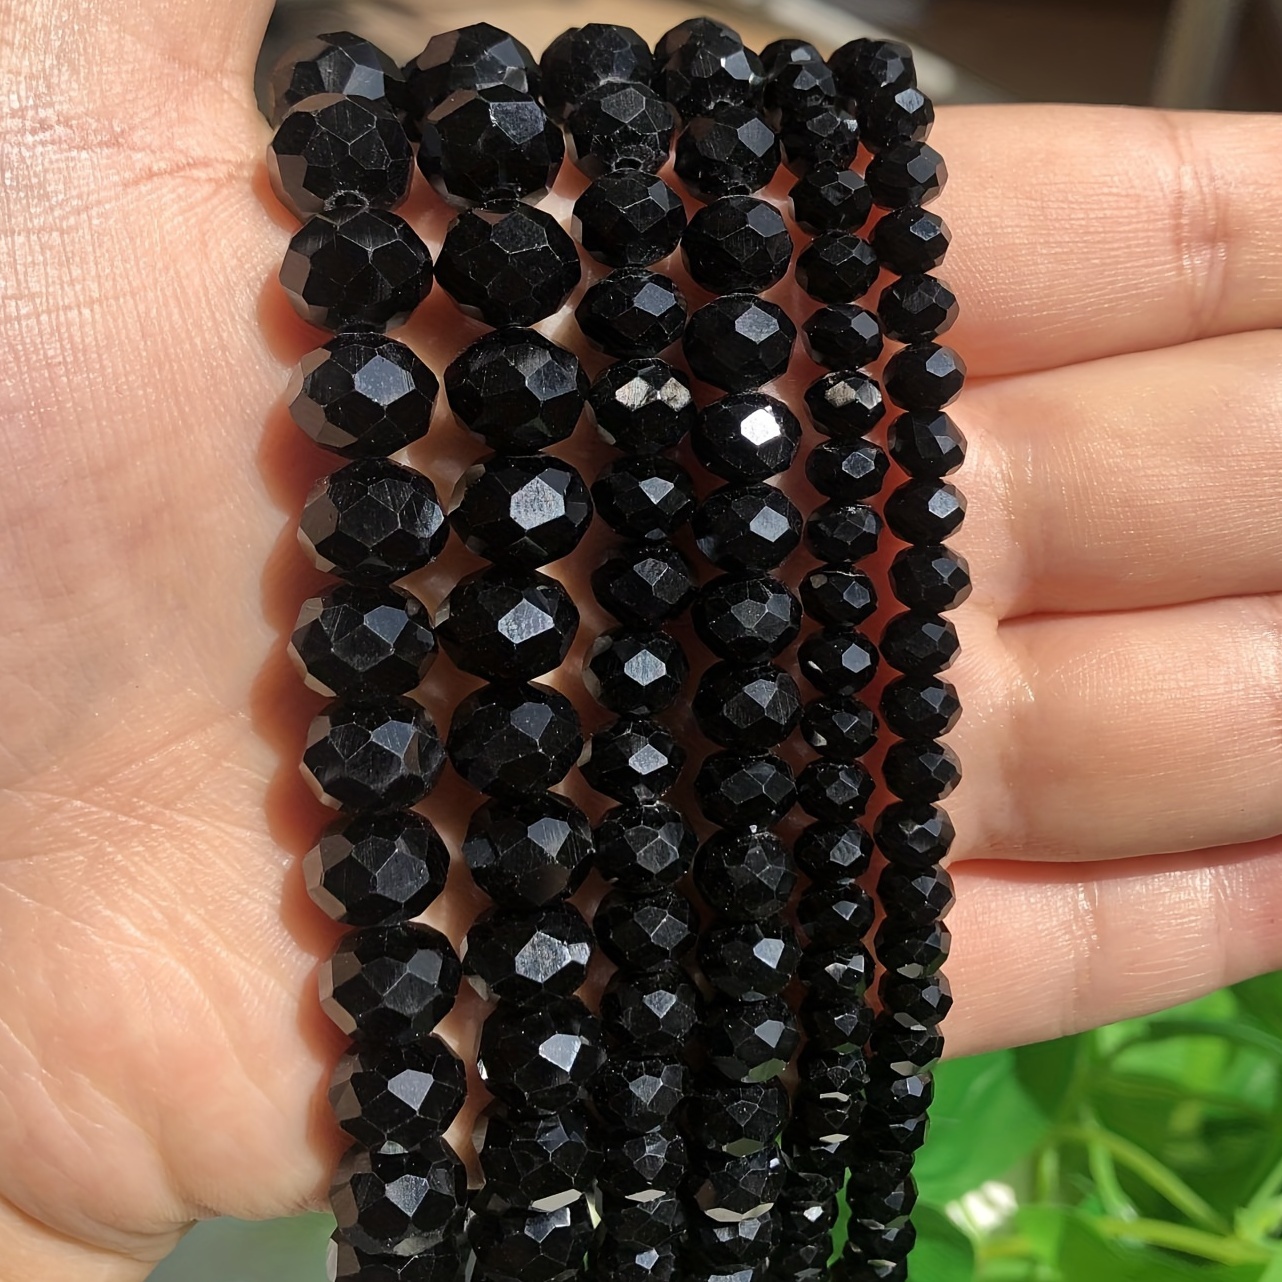 

4/6/8/10/12/14mm Black Crystal Stone Beads Rondelle Wheel Faceted Glass Loose Spacer Beads For Jewelry Making Diy Bracelet Necklace 15in